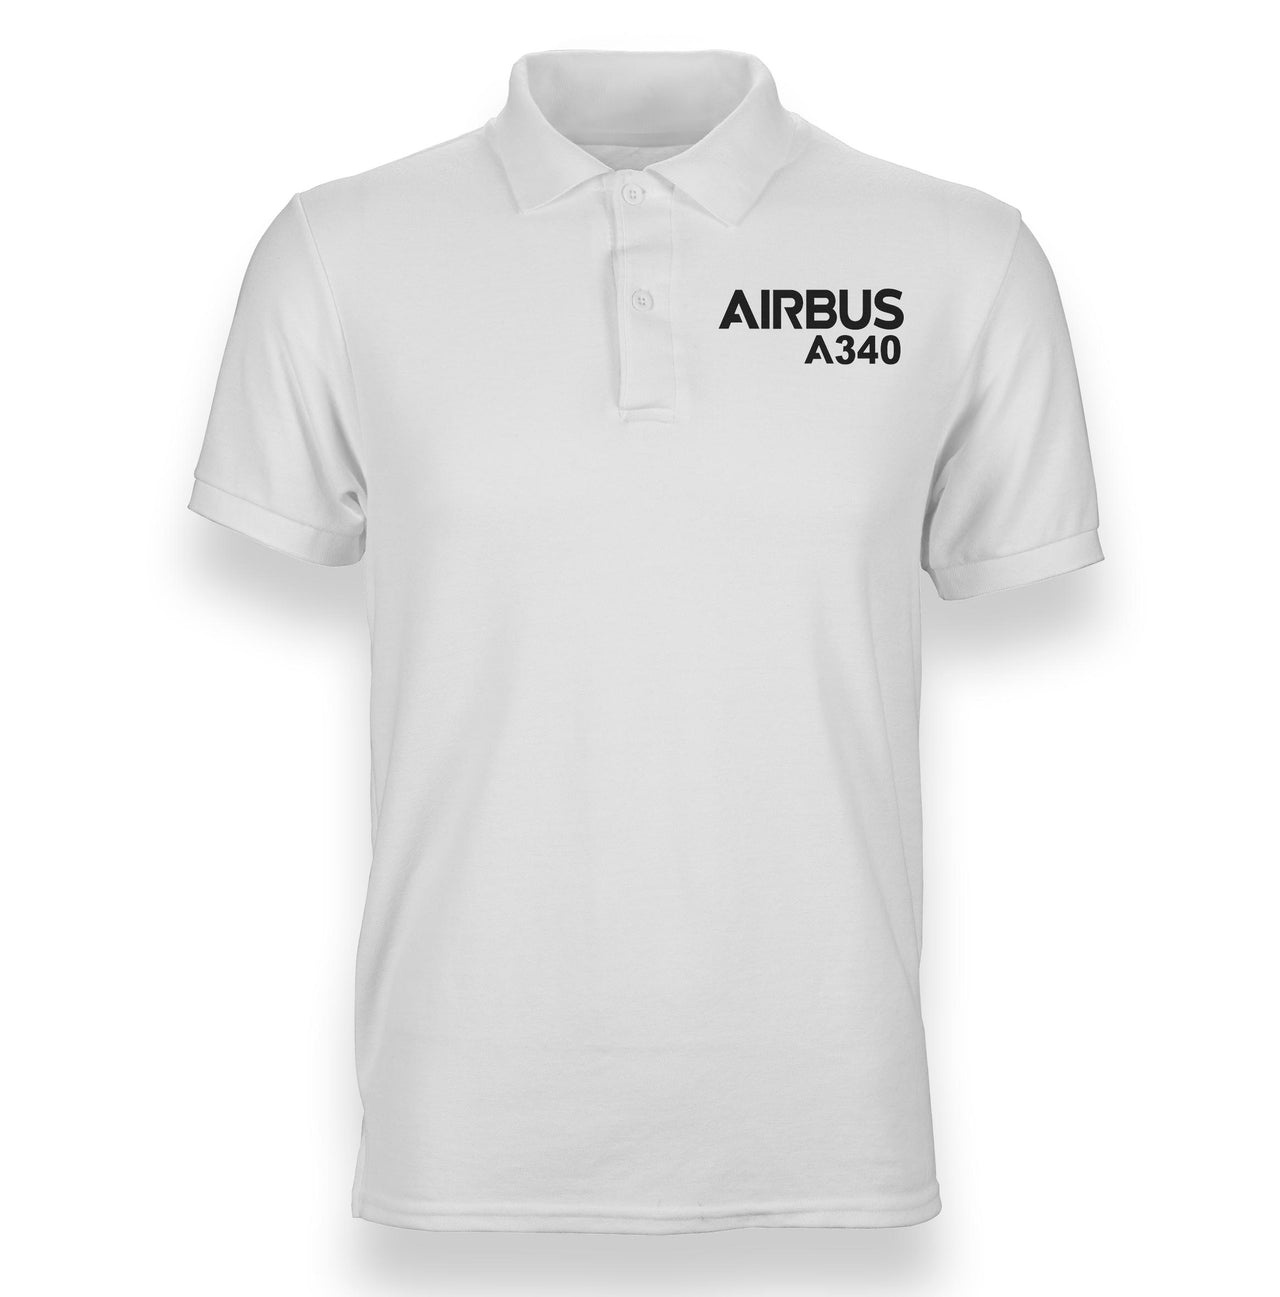 Airbus A340 & Text Designed Polo T-Shirts